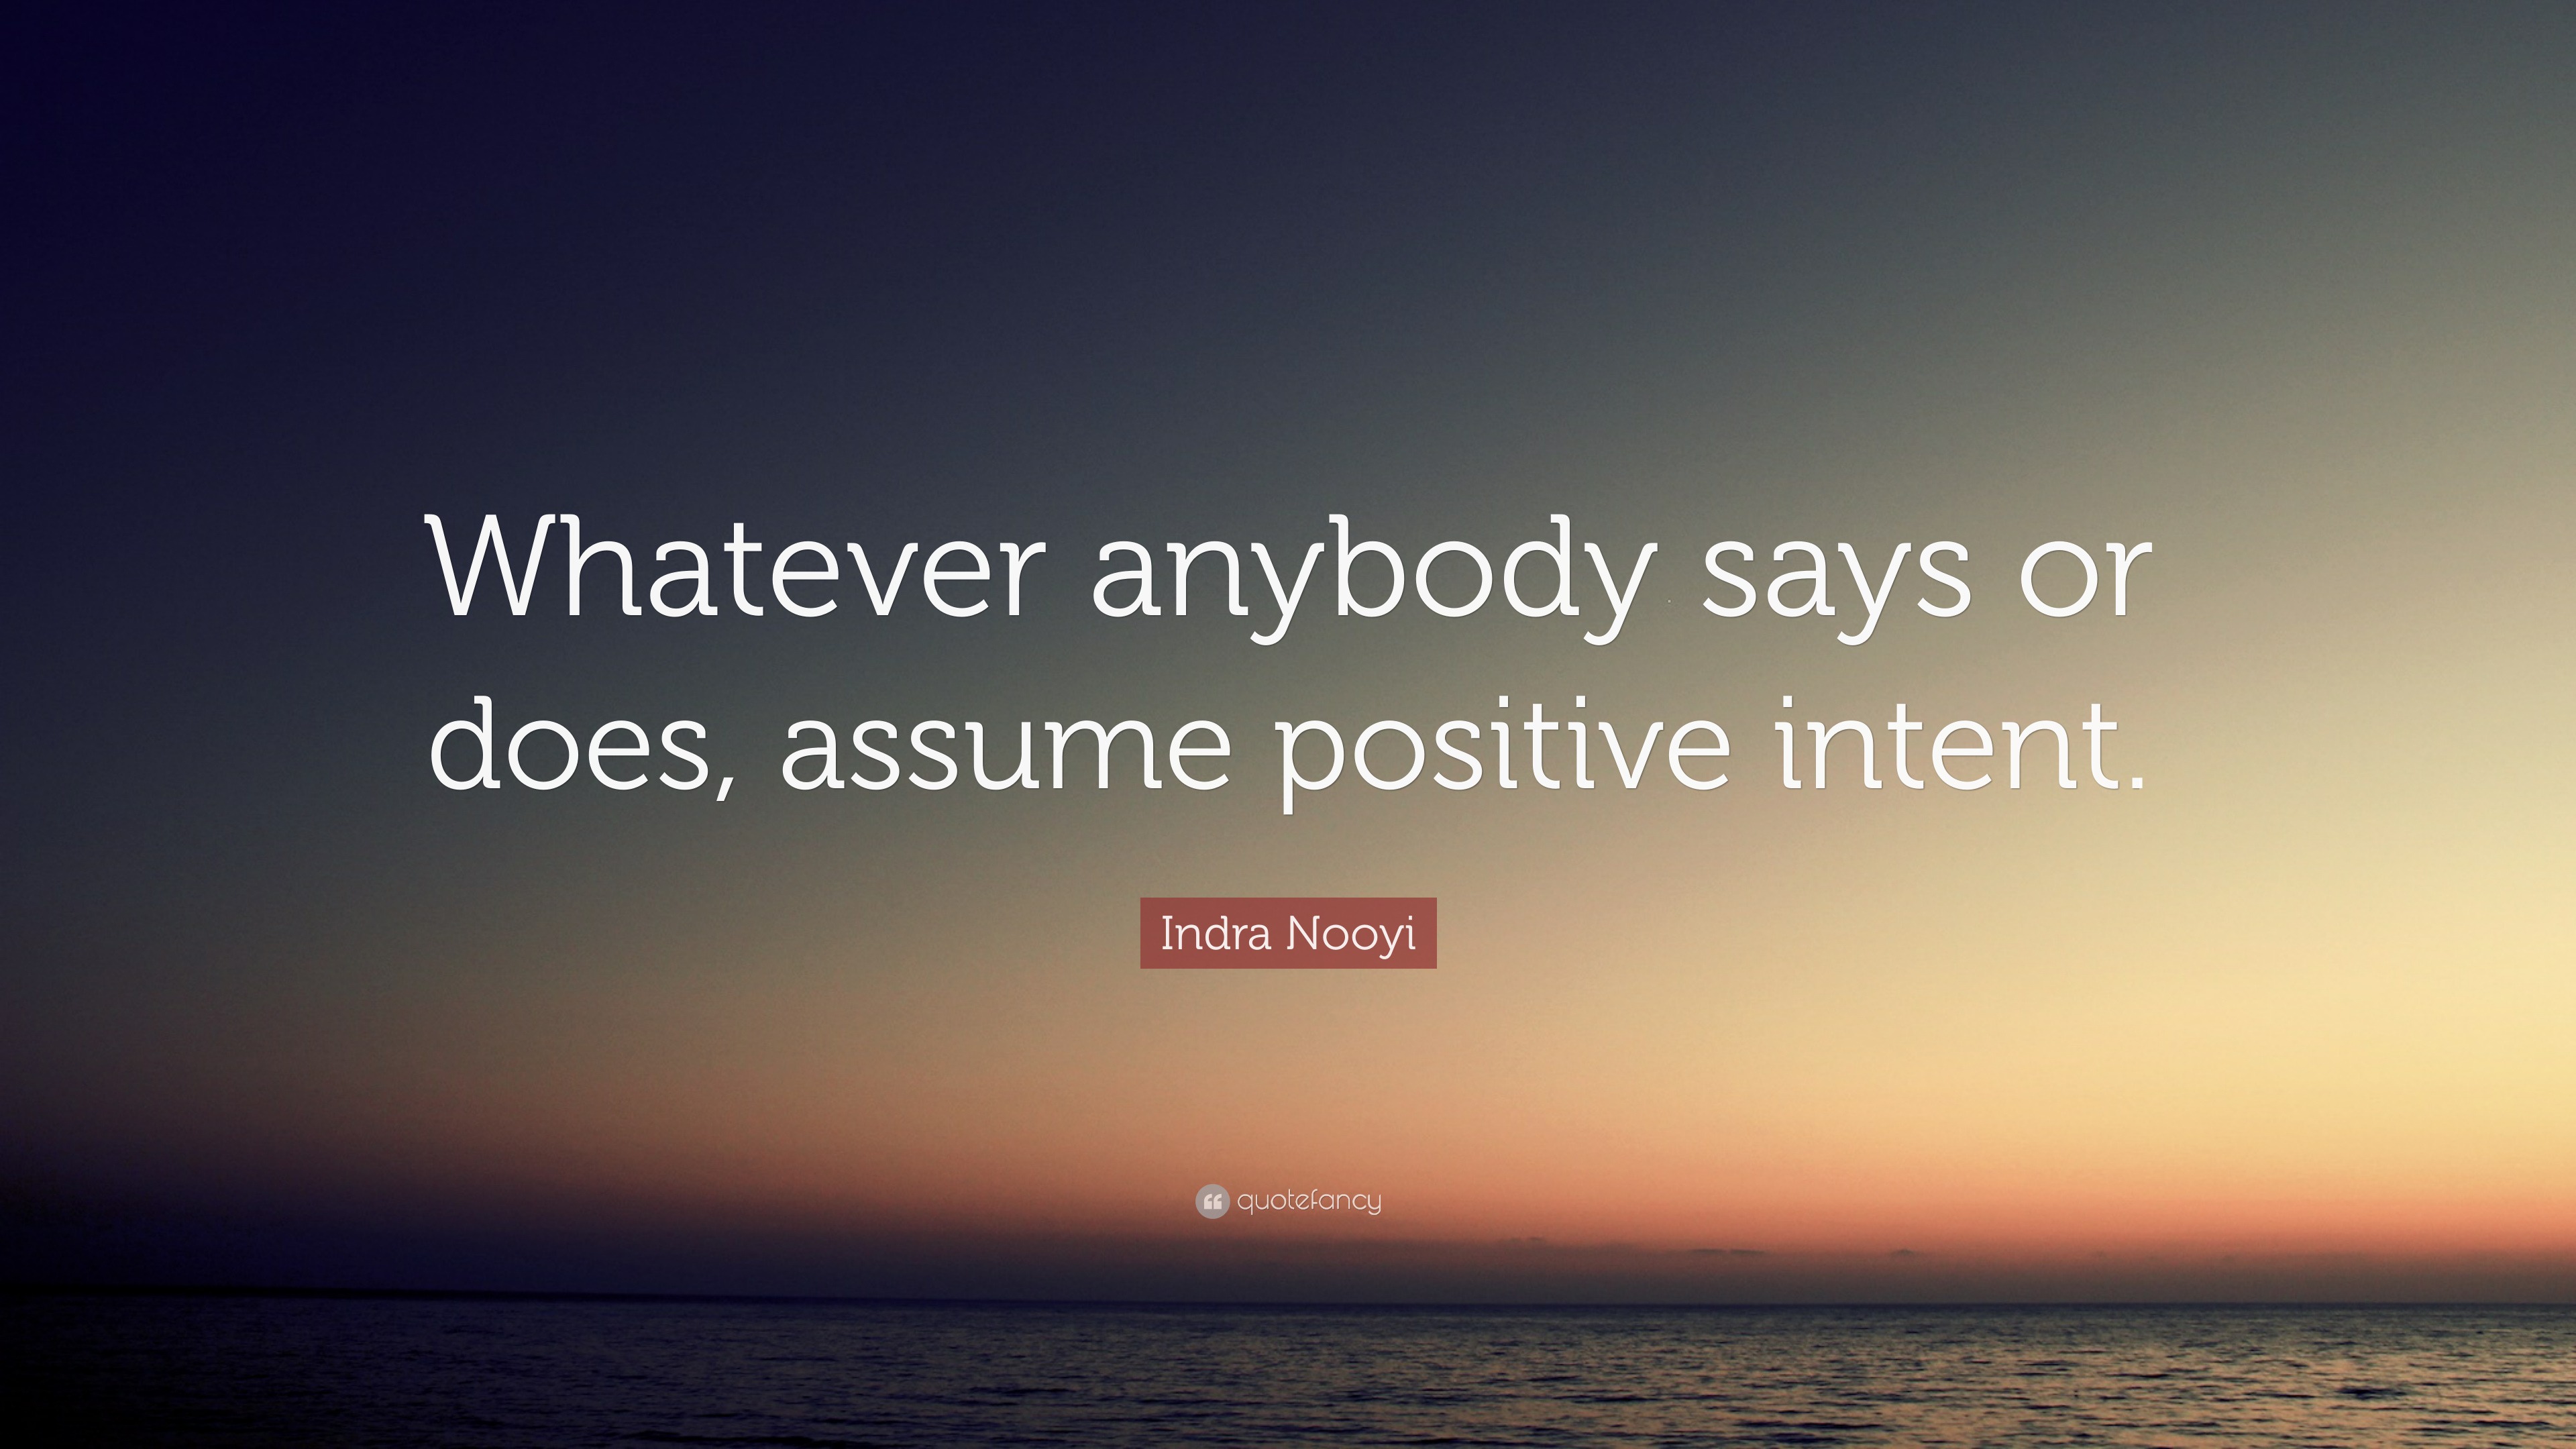 Indra Nooyi Quote: “Whatever anybody says or does, assume positive